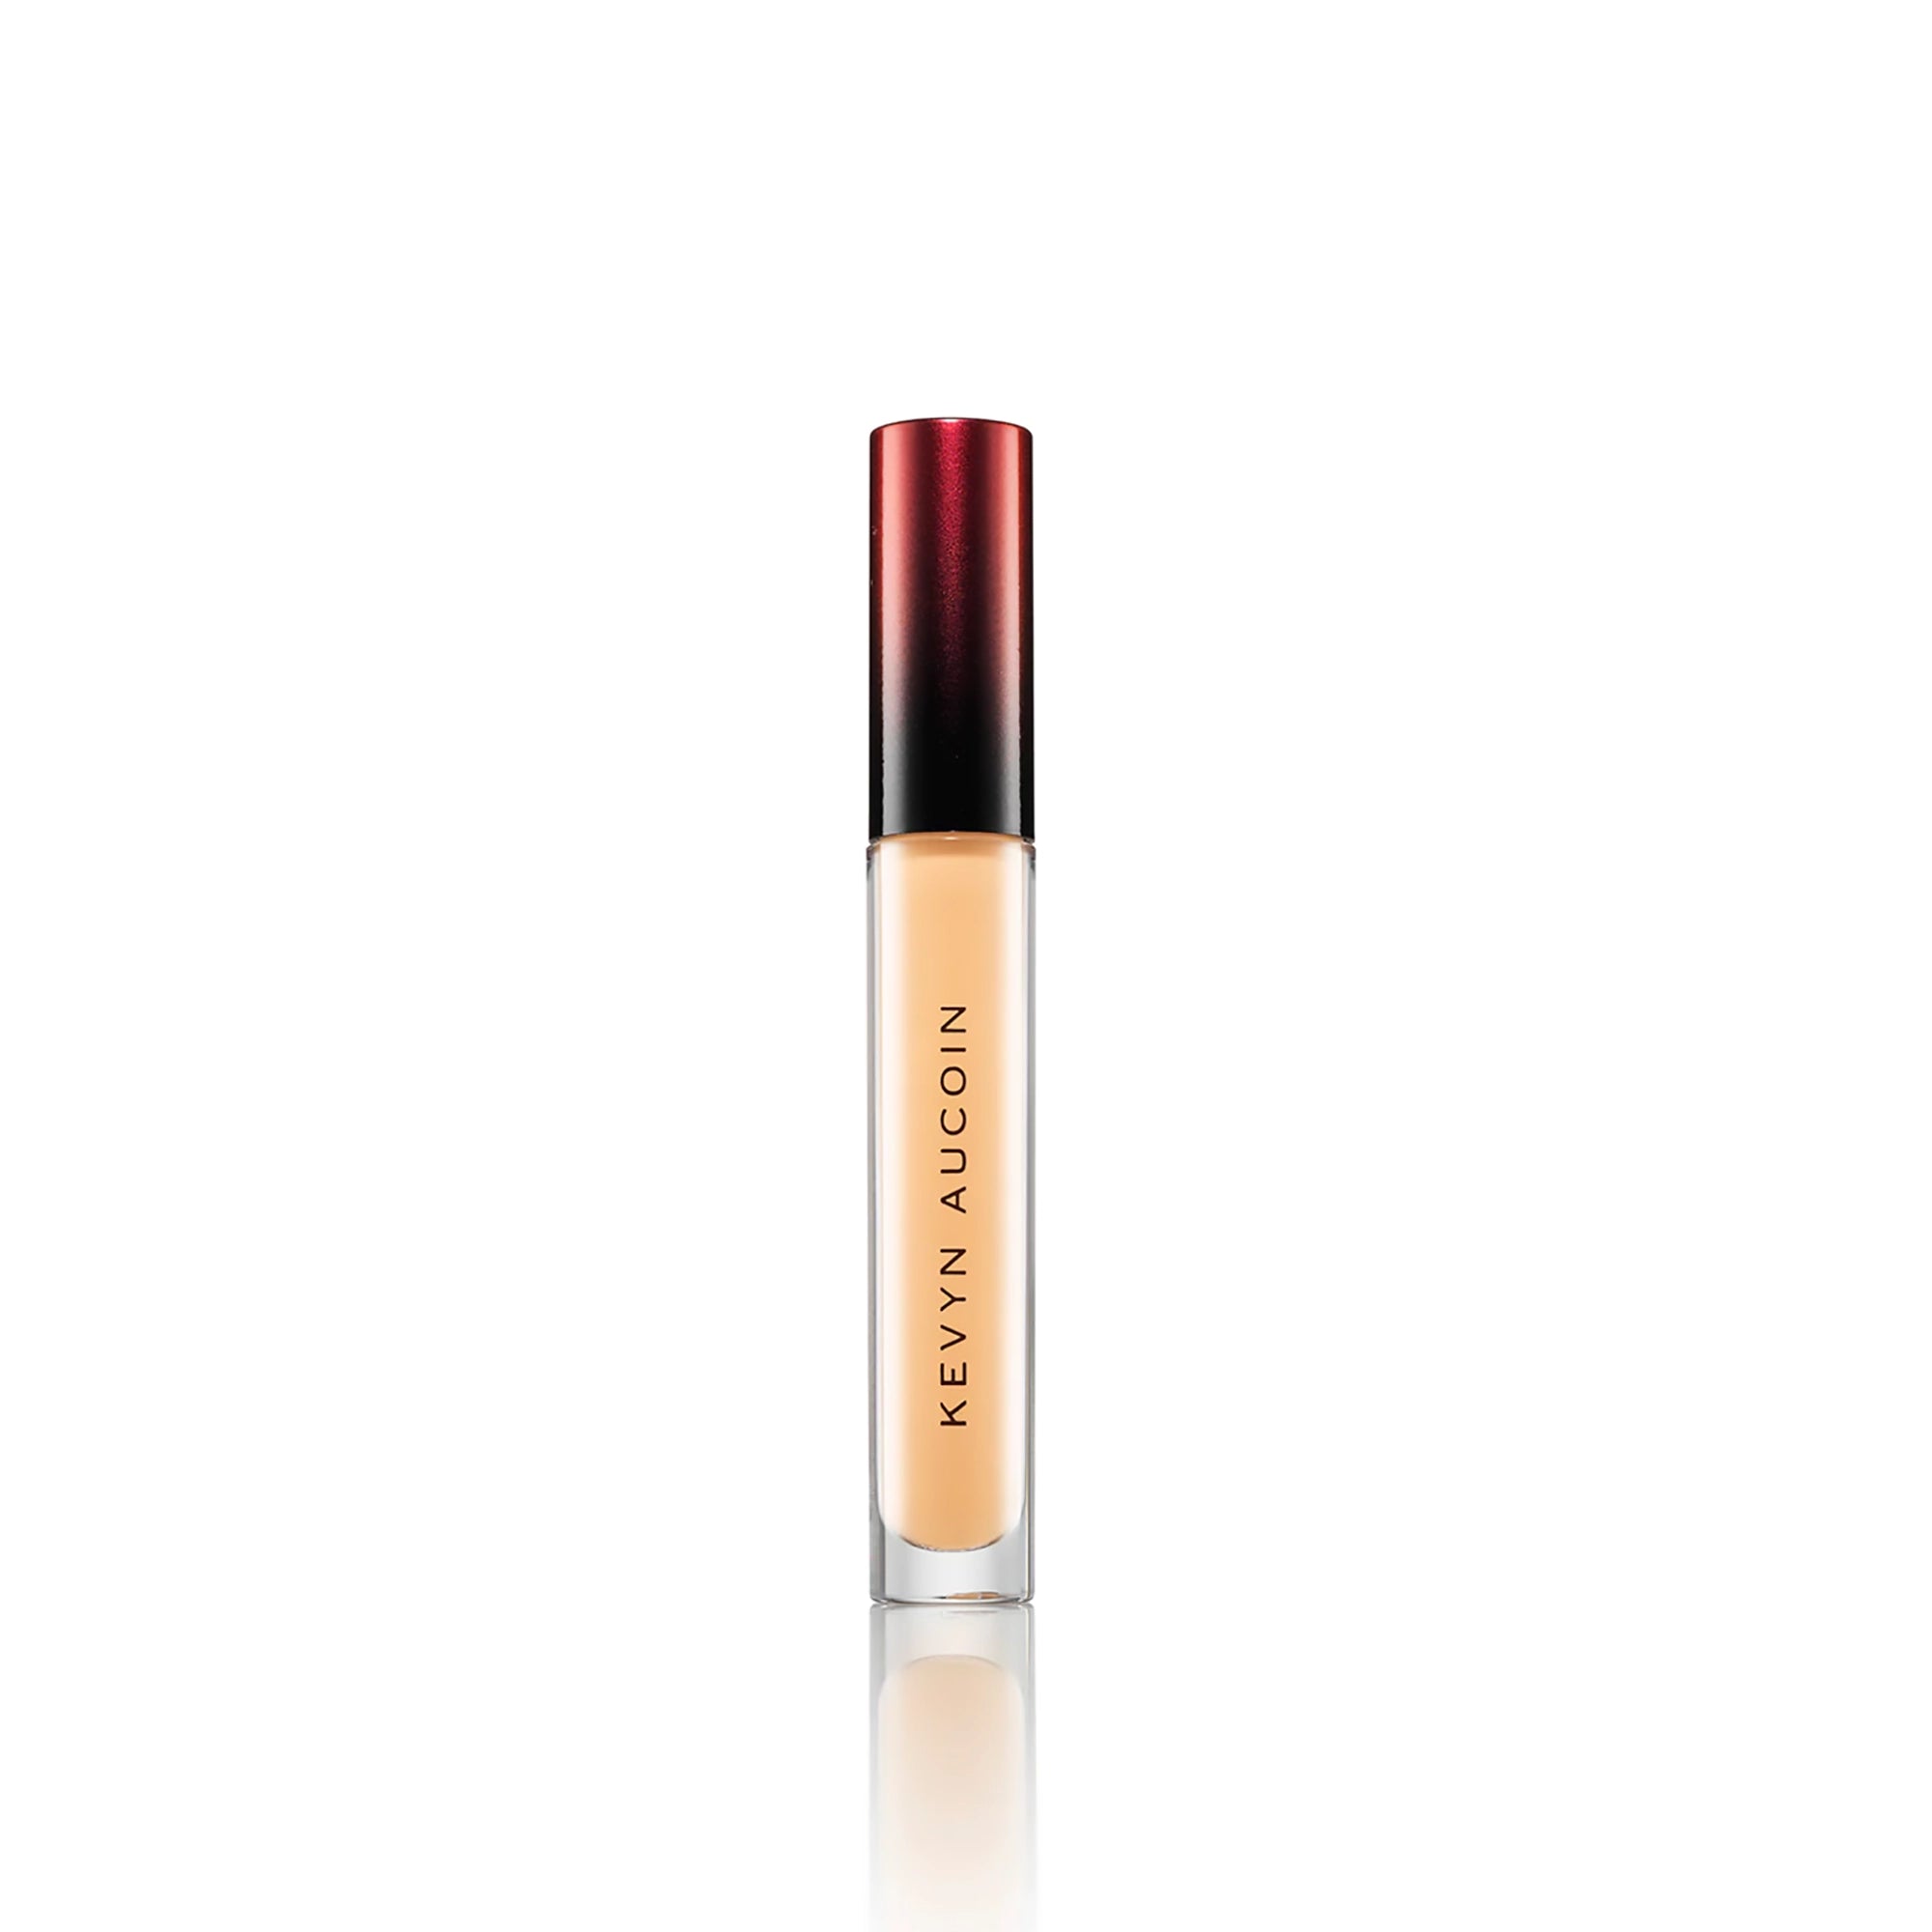 Kevyn Aucoin The Etherealist Super Natural Concealer / MEDIUM 3